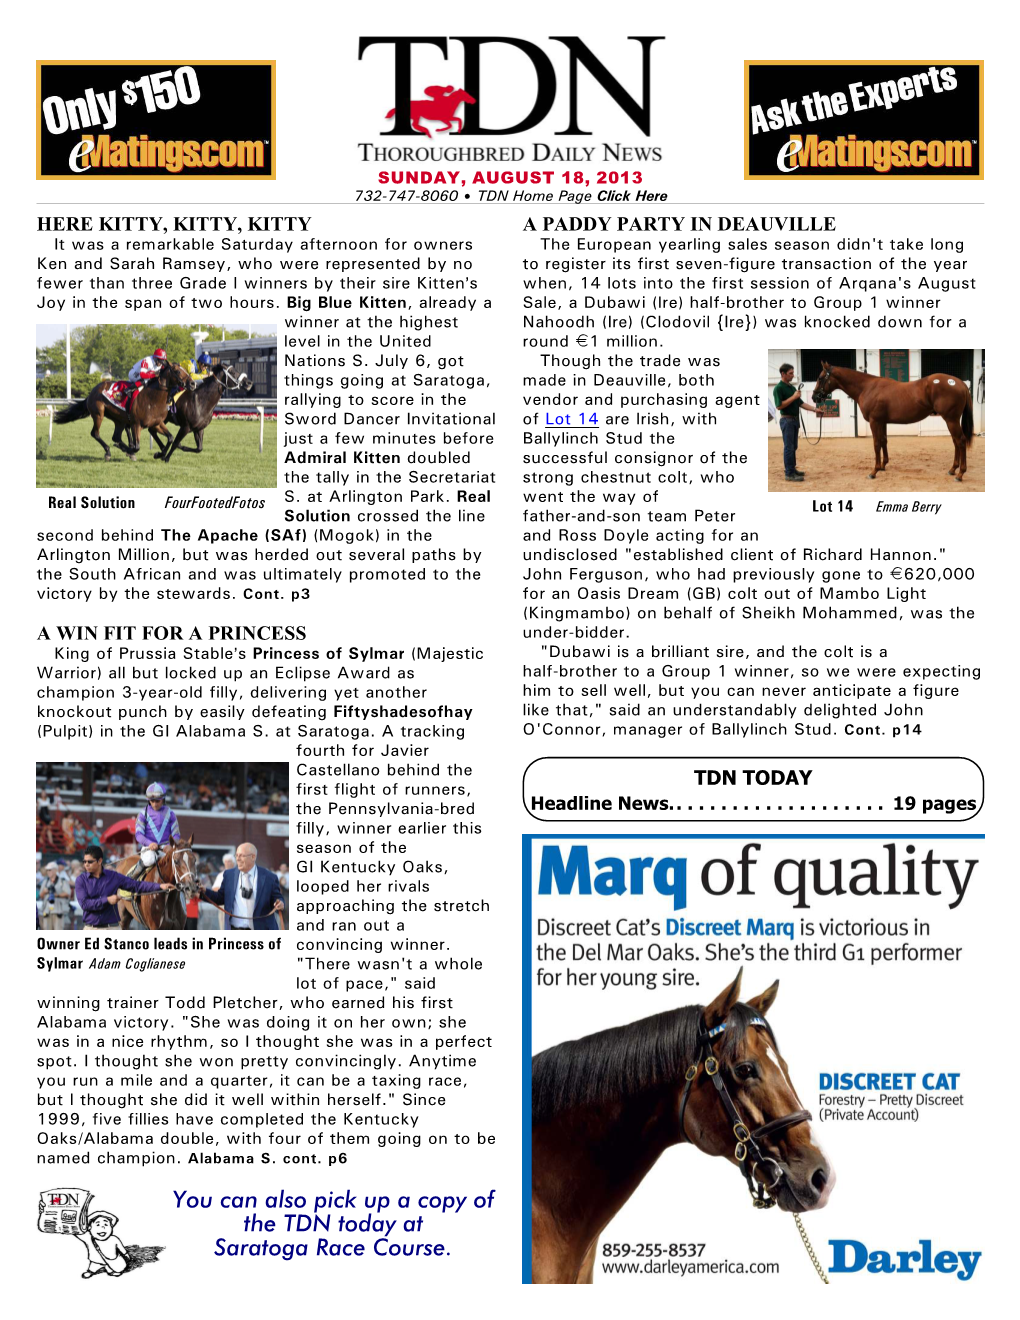 You Can Also Pick up a Copy of the TDN Today at Saratoga Race Course